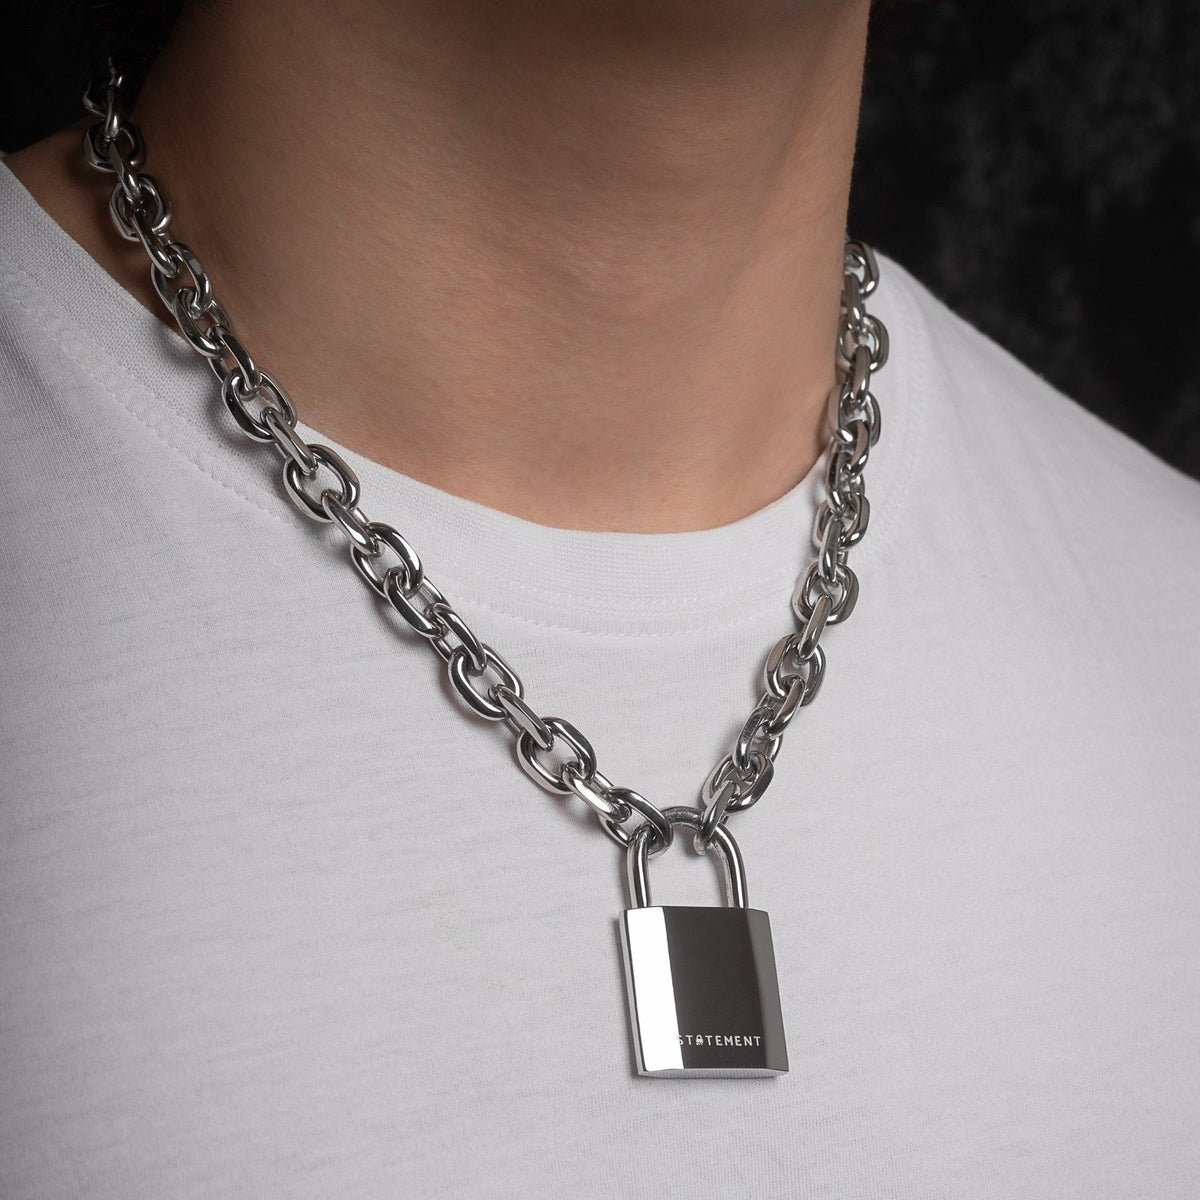 Silver Tone Lock Necklace by Statement Collective_03